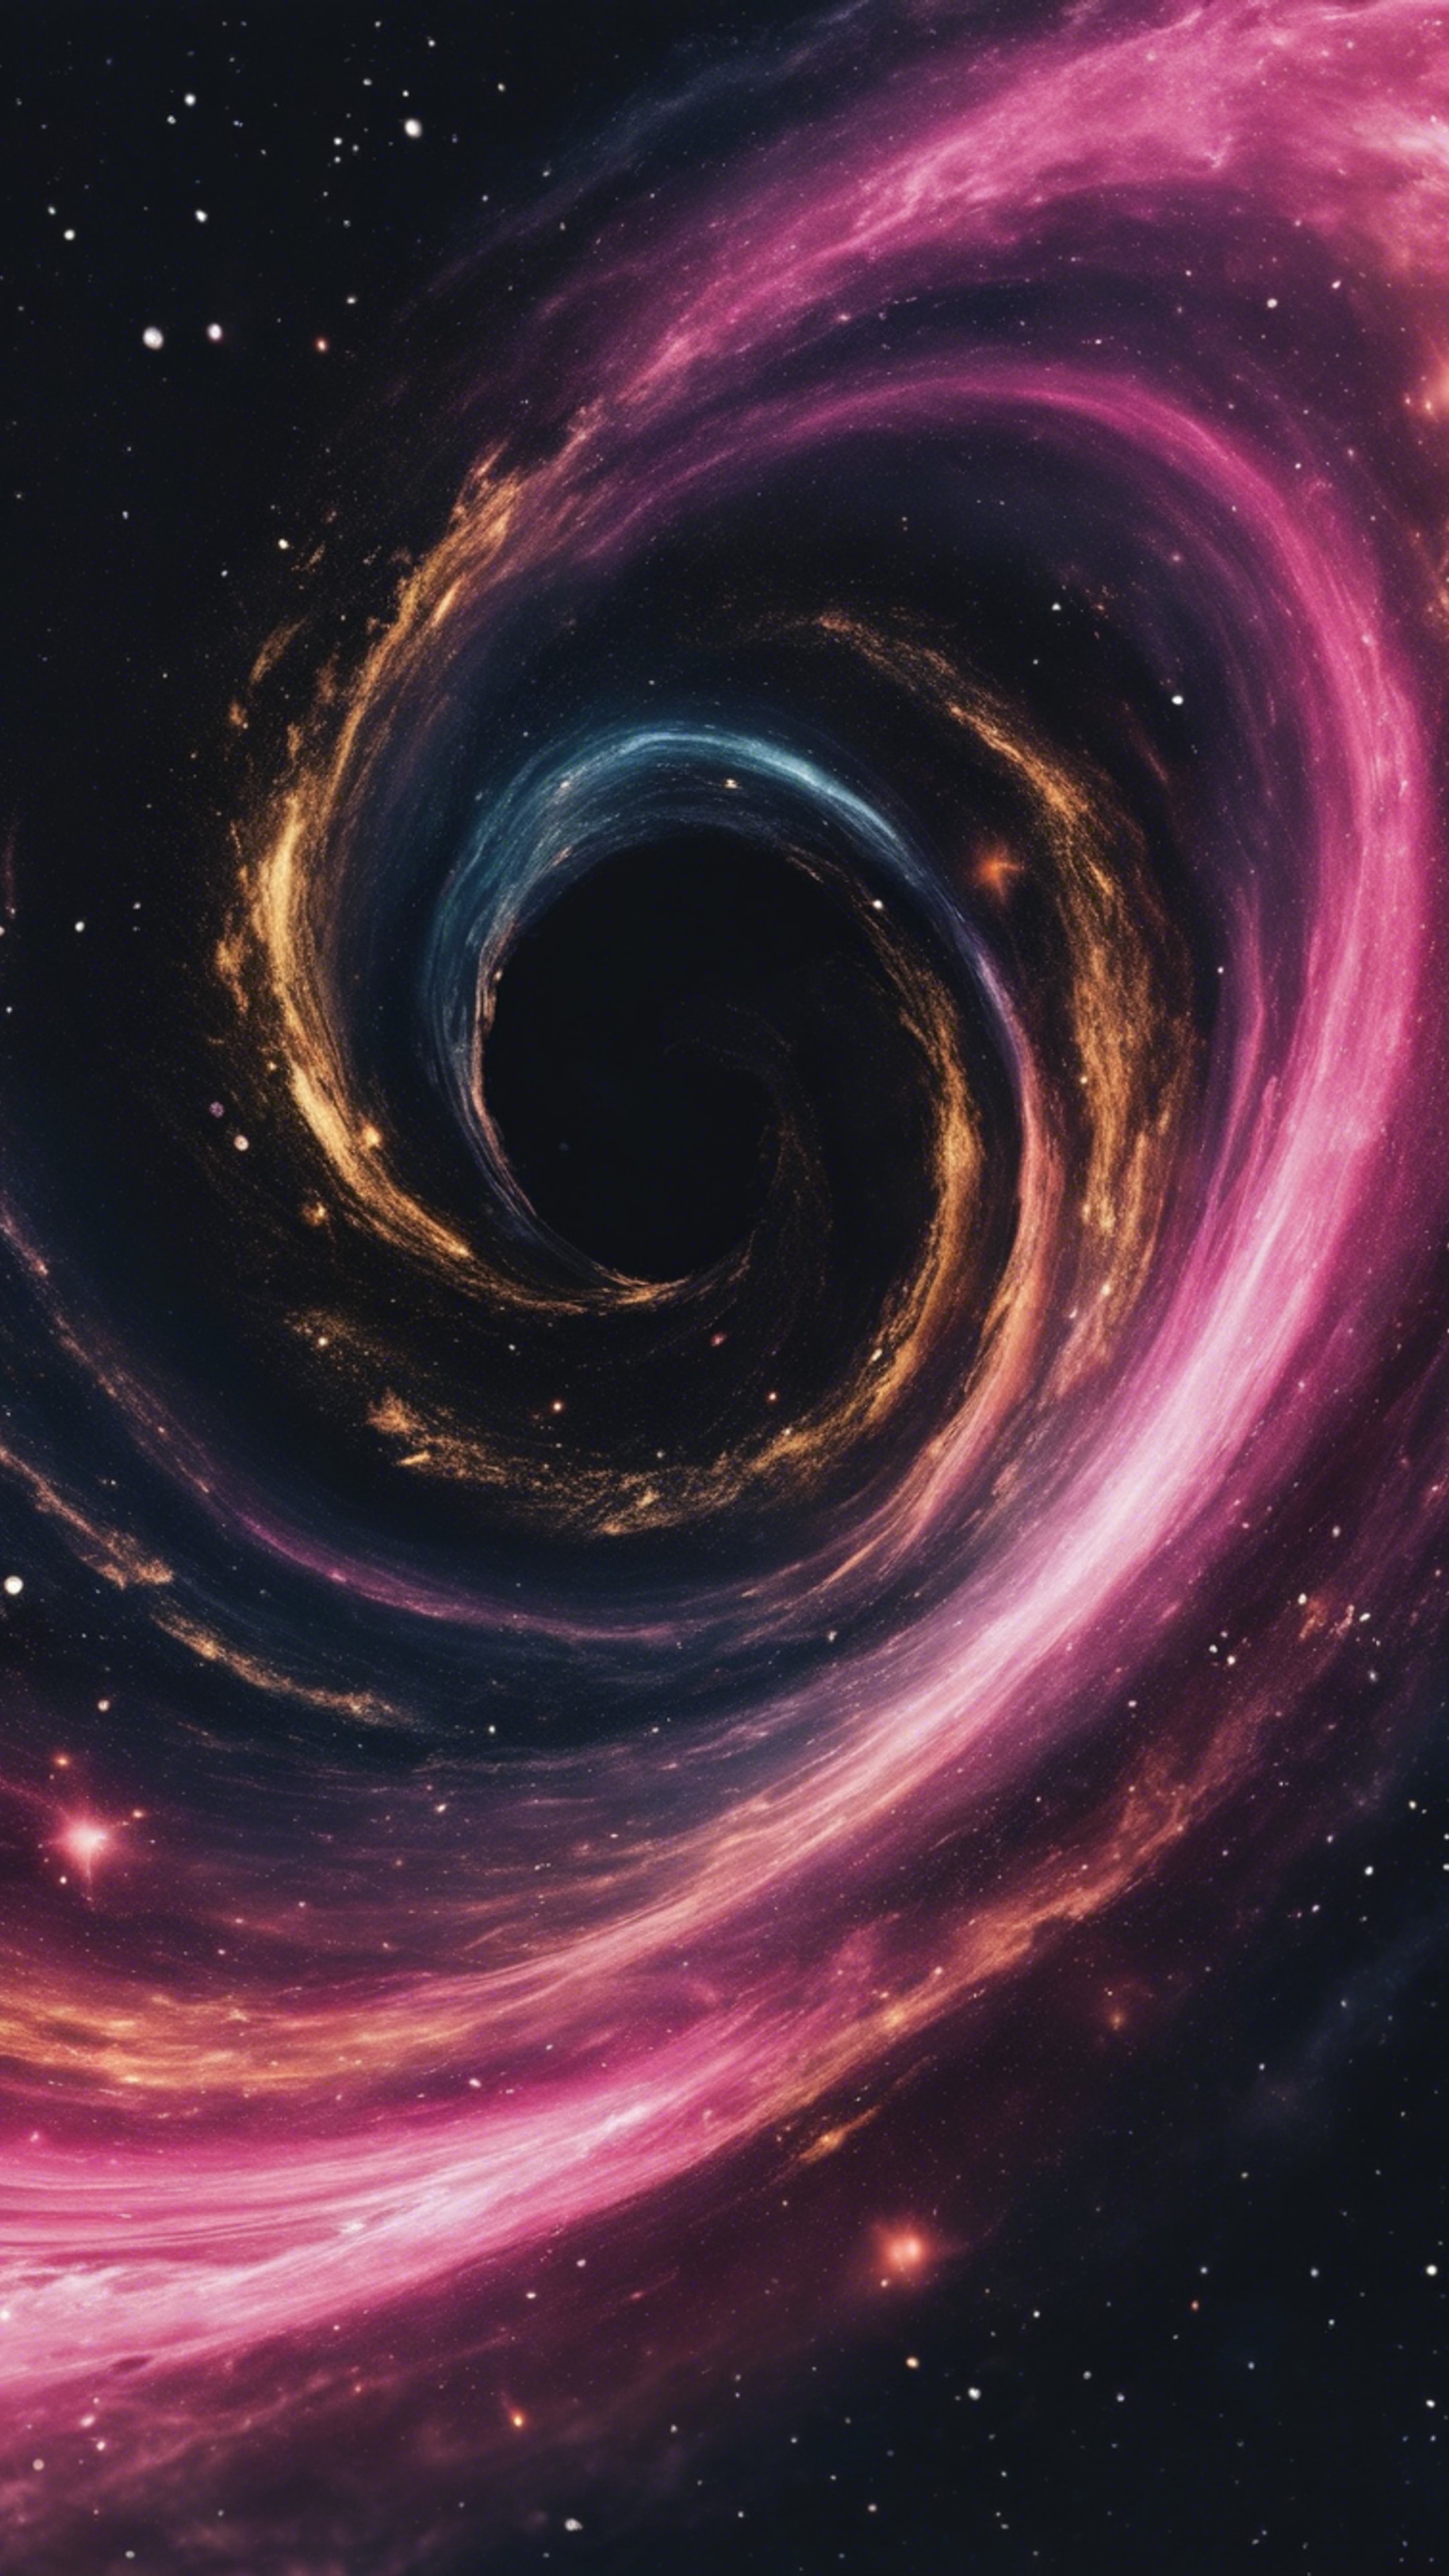 A swirling Galaxy with hues of pink and gold amongst the dark void of space. Tapeta na zeď[38386911806f452c9333]